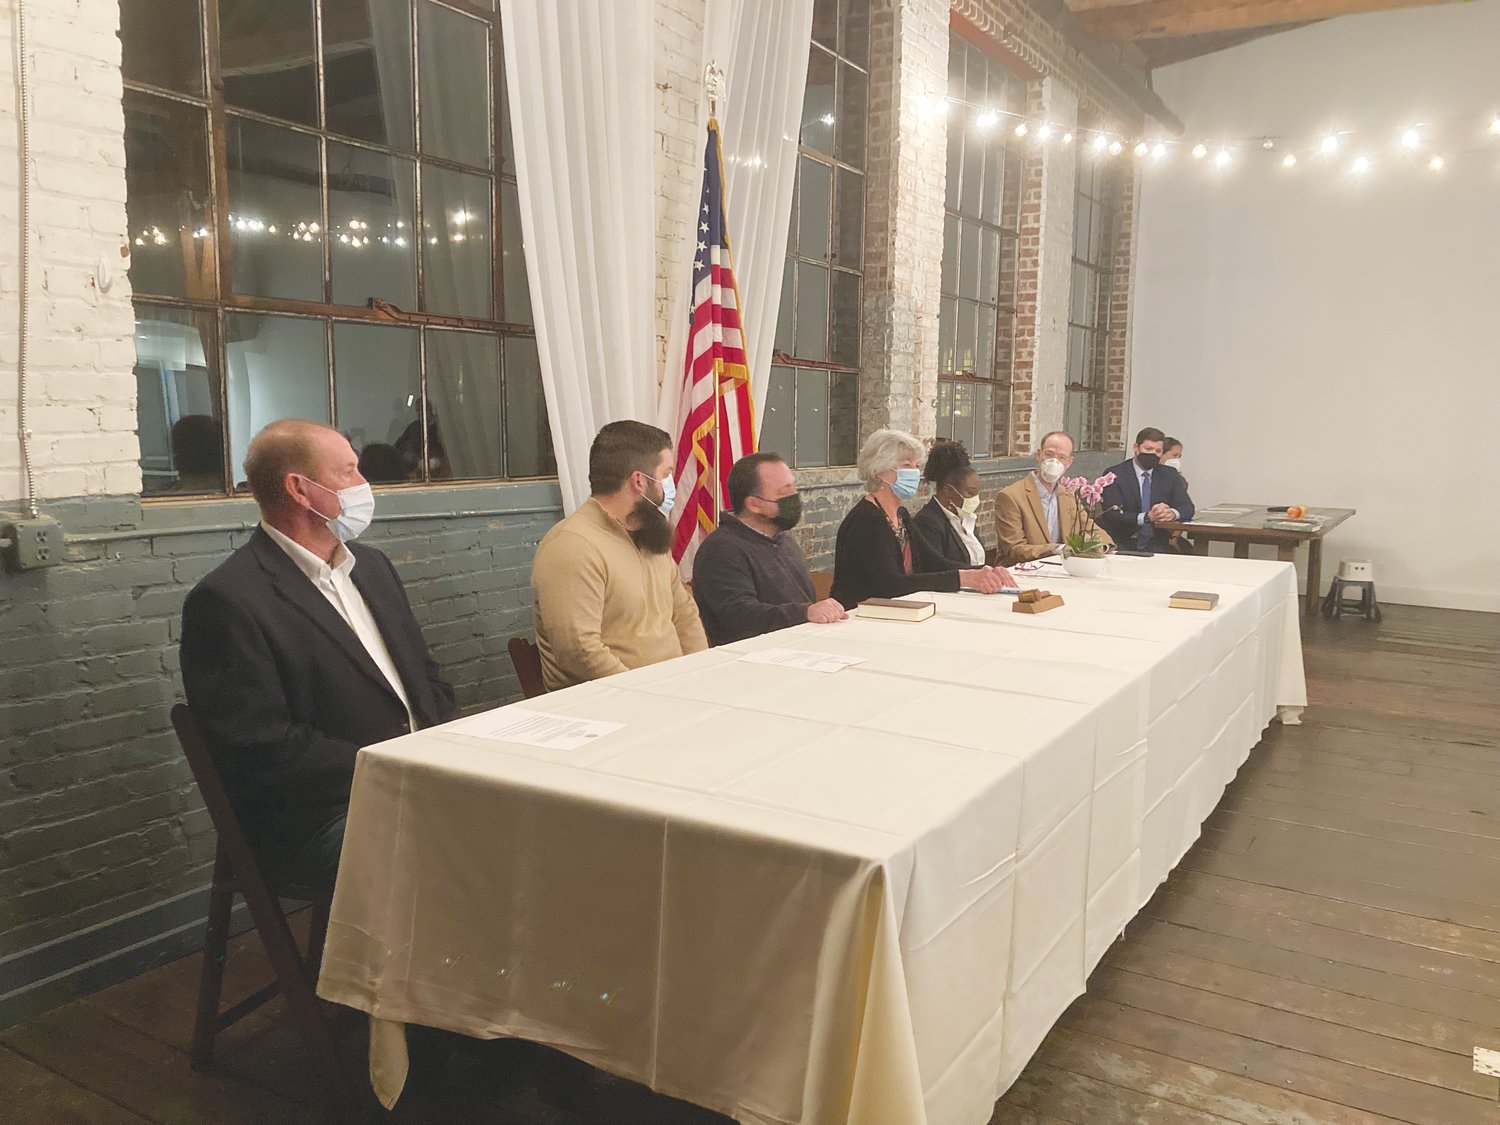 The newly-constituted Pittsboro Board of Commissioners met for the time time Monday night.